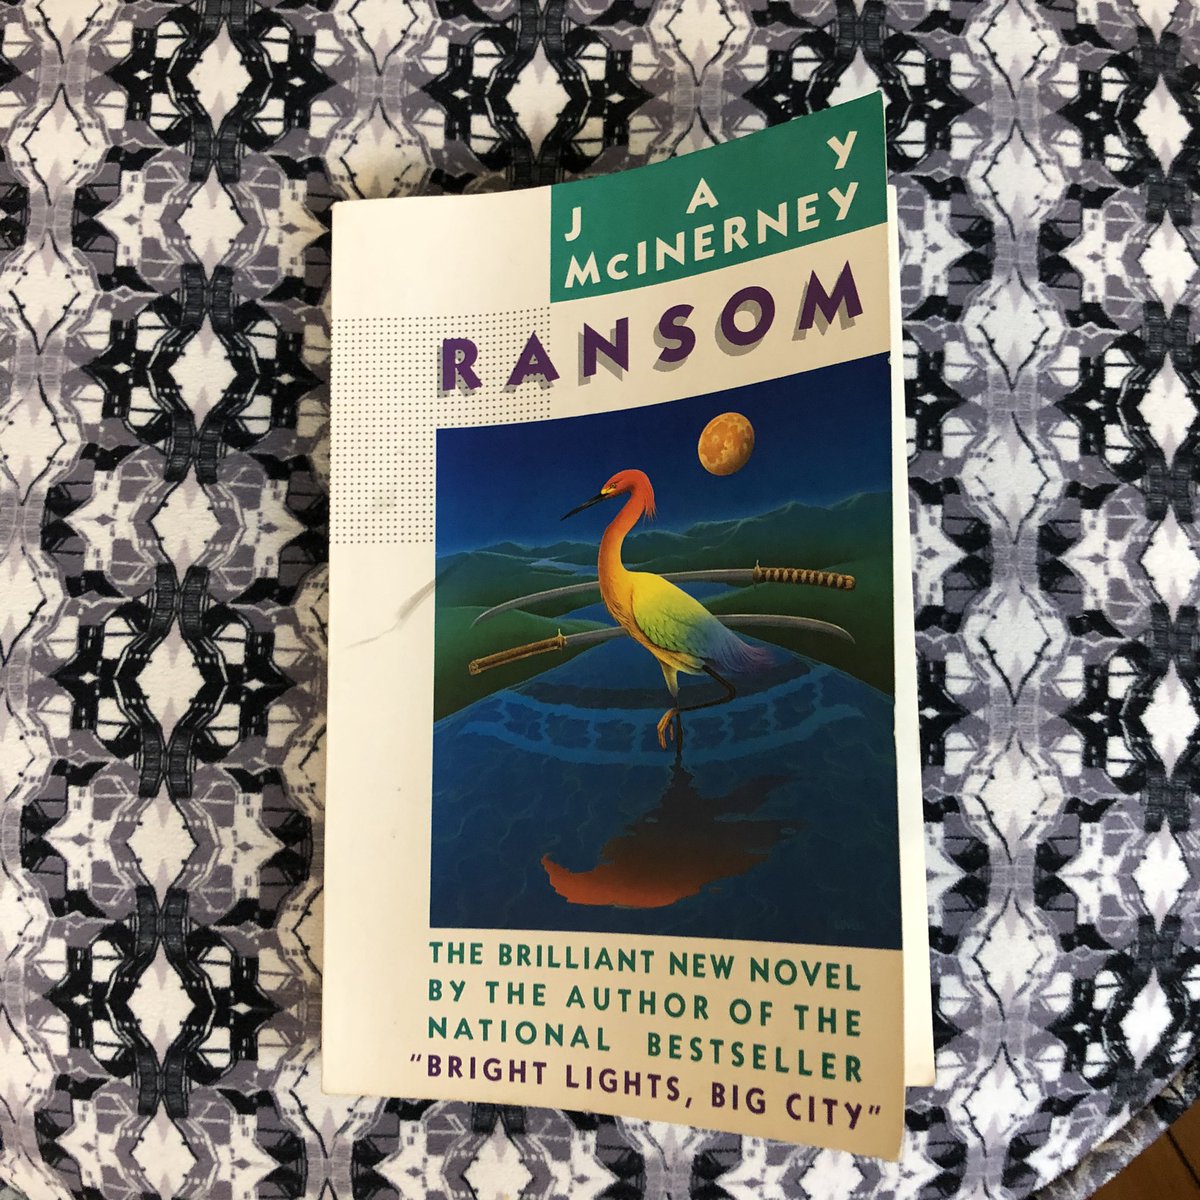 33/52Ransom by Jay McInerney.  #52booksin52weeks  #2020books  #booksof2020  #pandemicreading